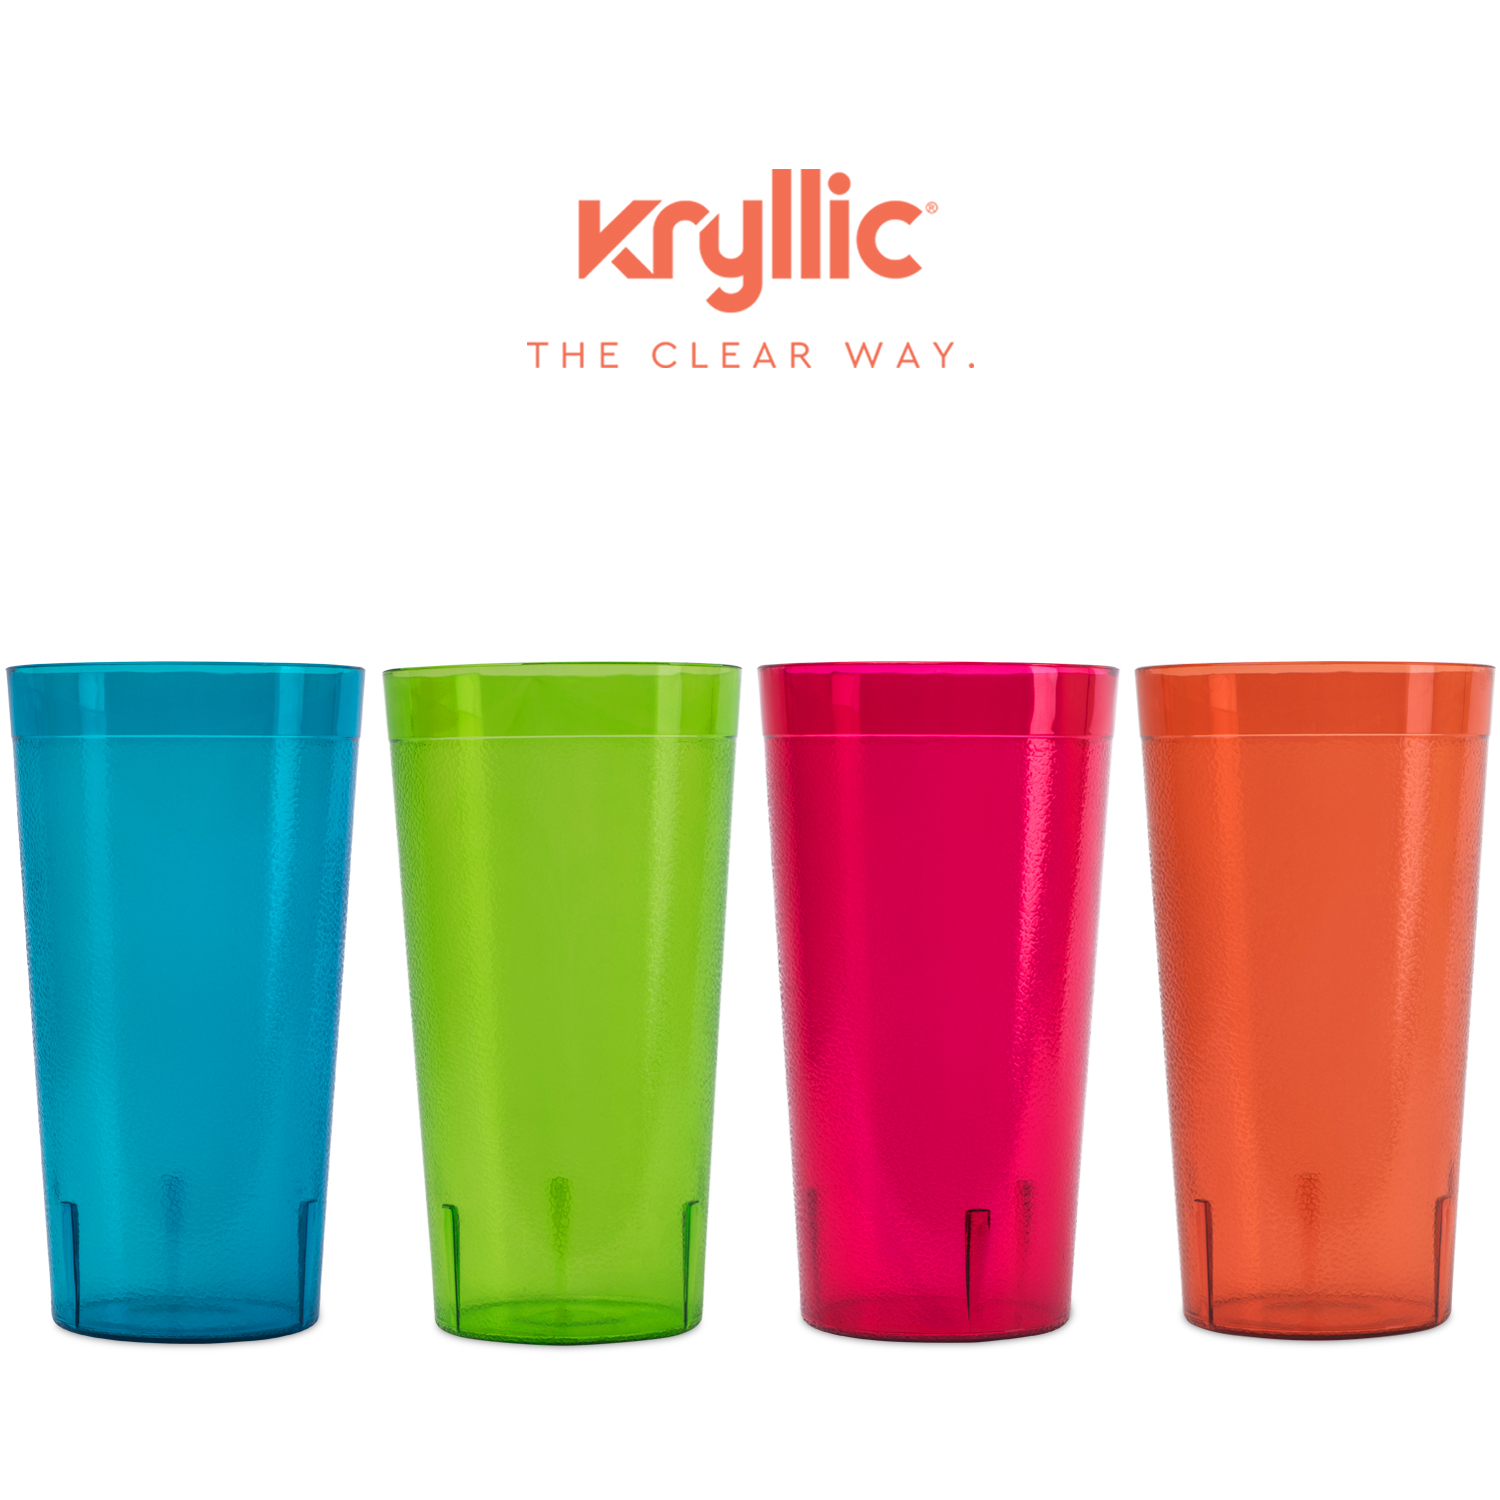 Plastic Cup Tumblers Drinkware Glasses - Break Resistant 20 oz. Kitchen Restaurant High Quality Set of 16 in 4 Assorted Colors - Best Gift Idea By Kryllic - image 2 of 11